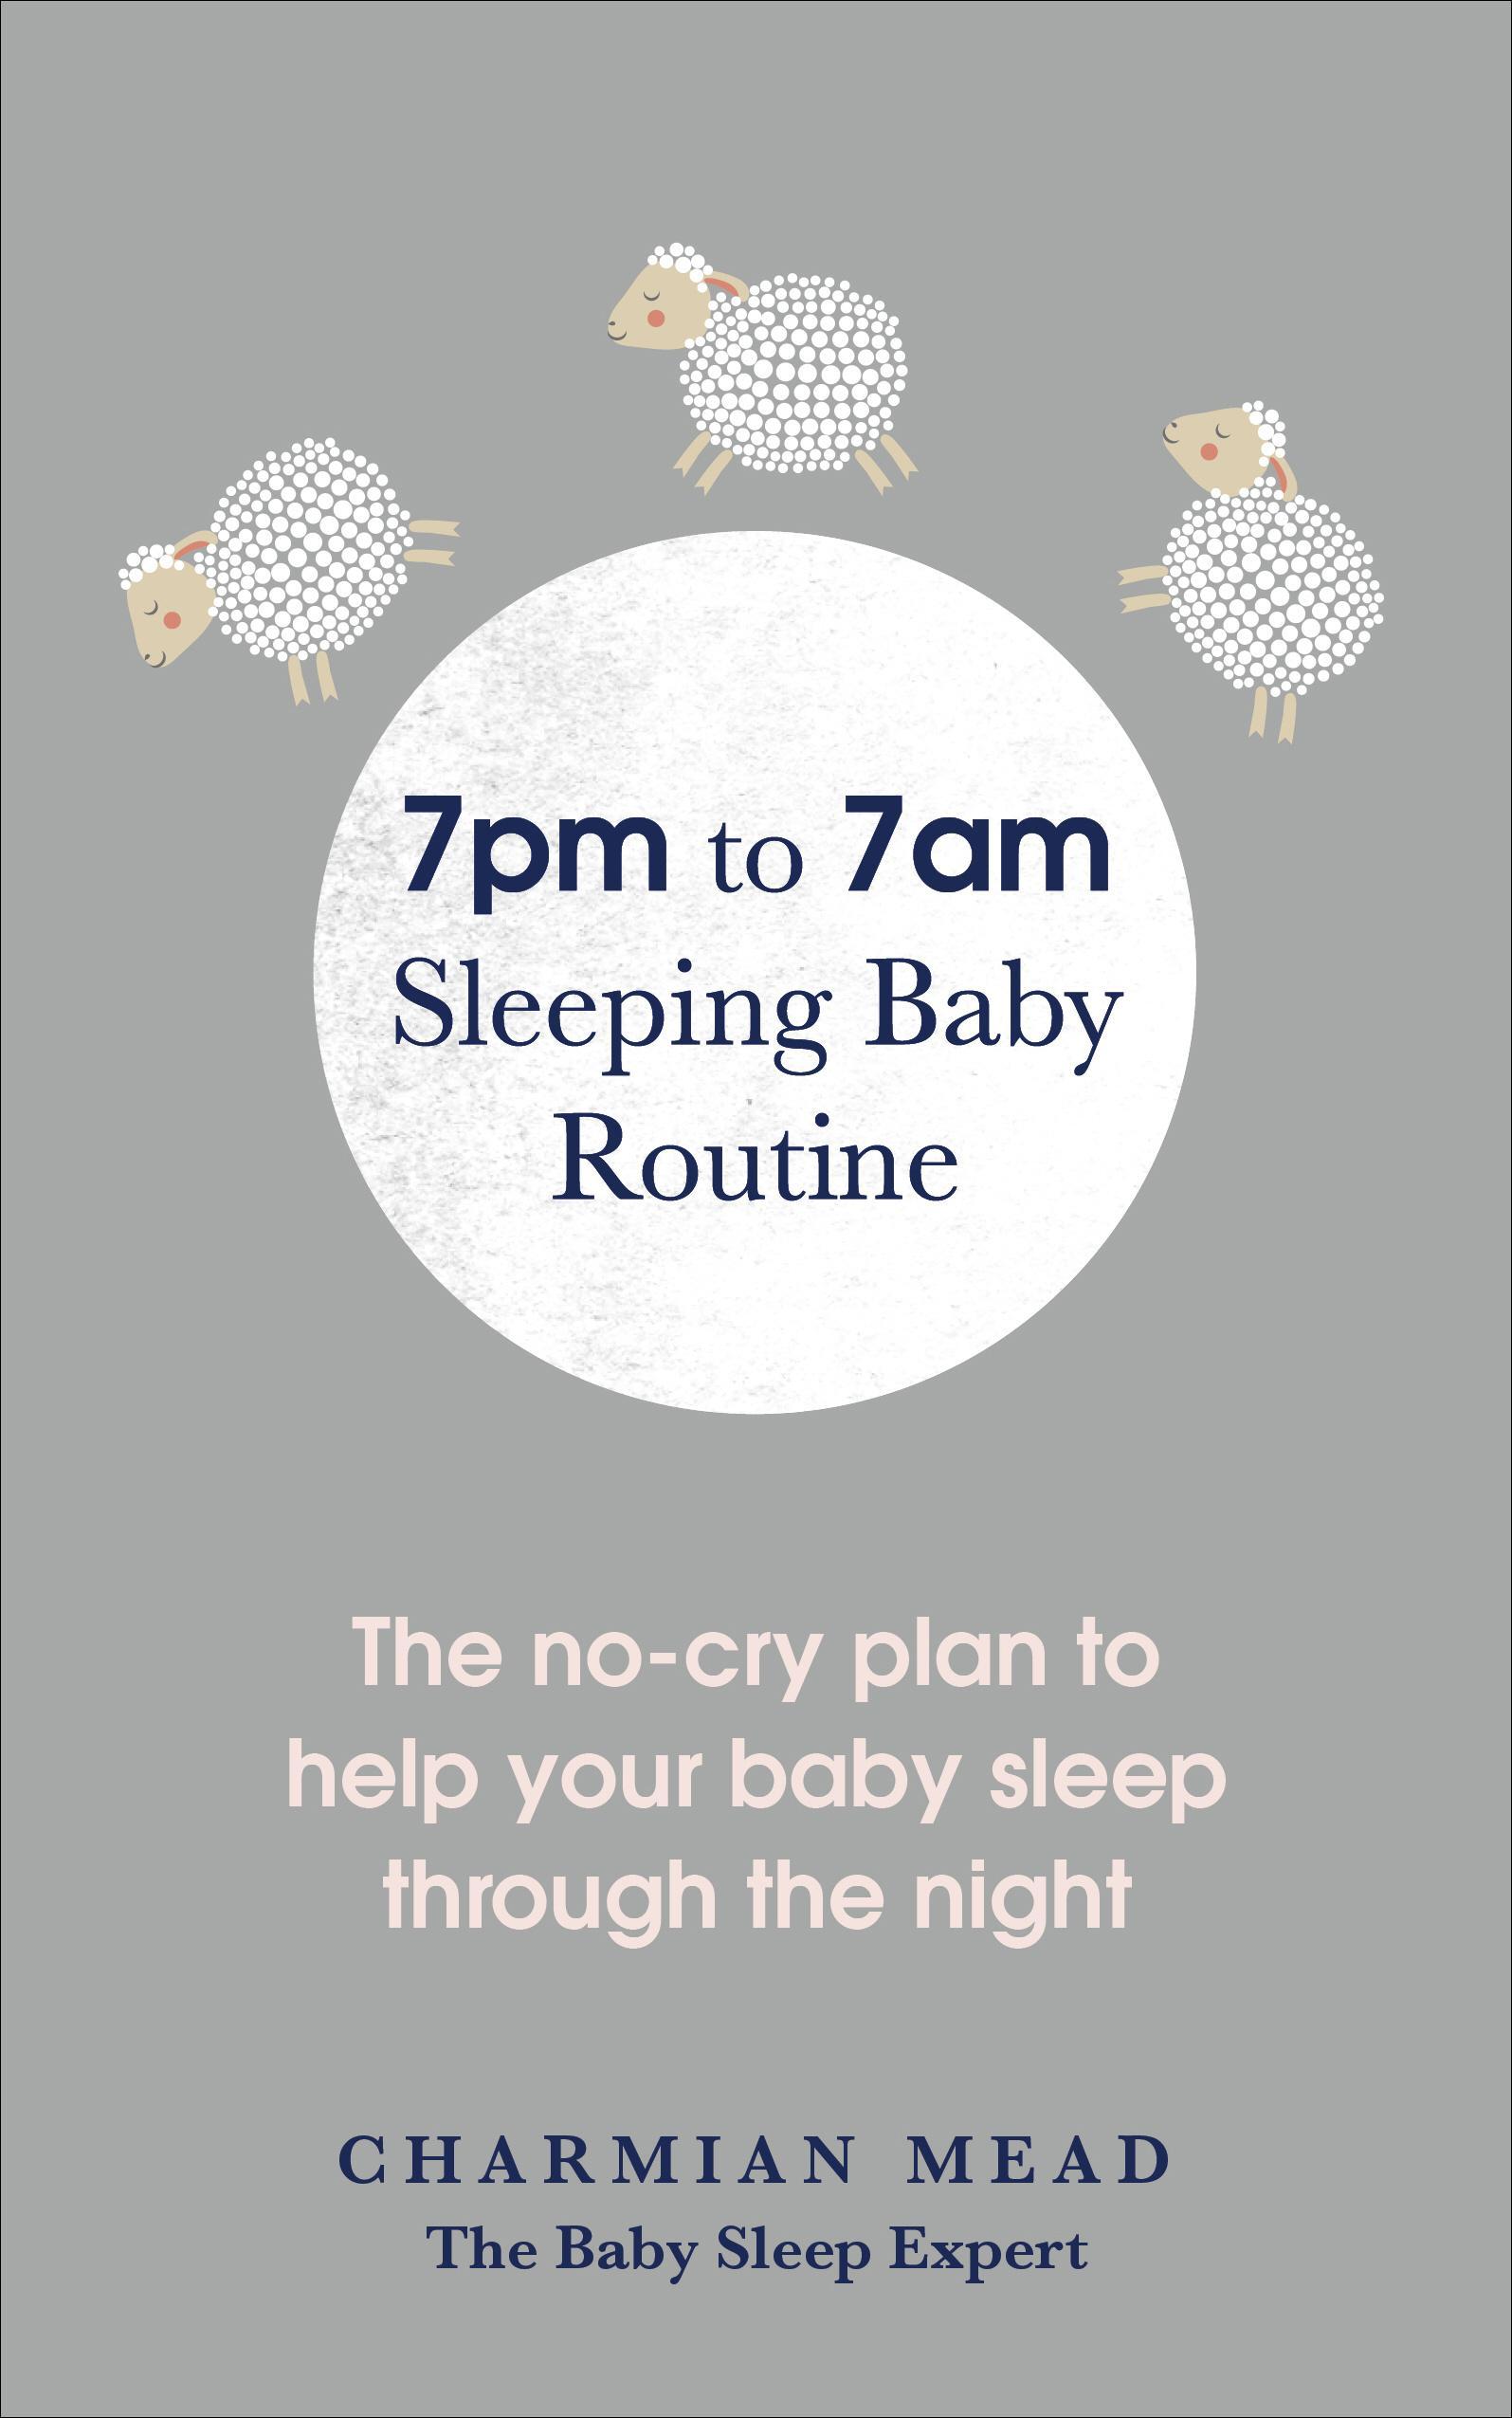 7pm to 7am Sleeping Baby Routine - Charmian Mead